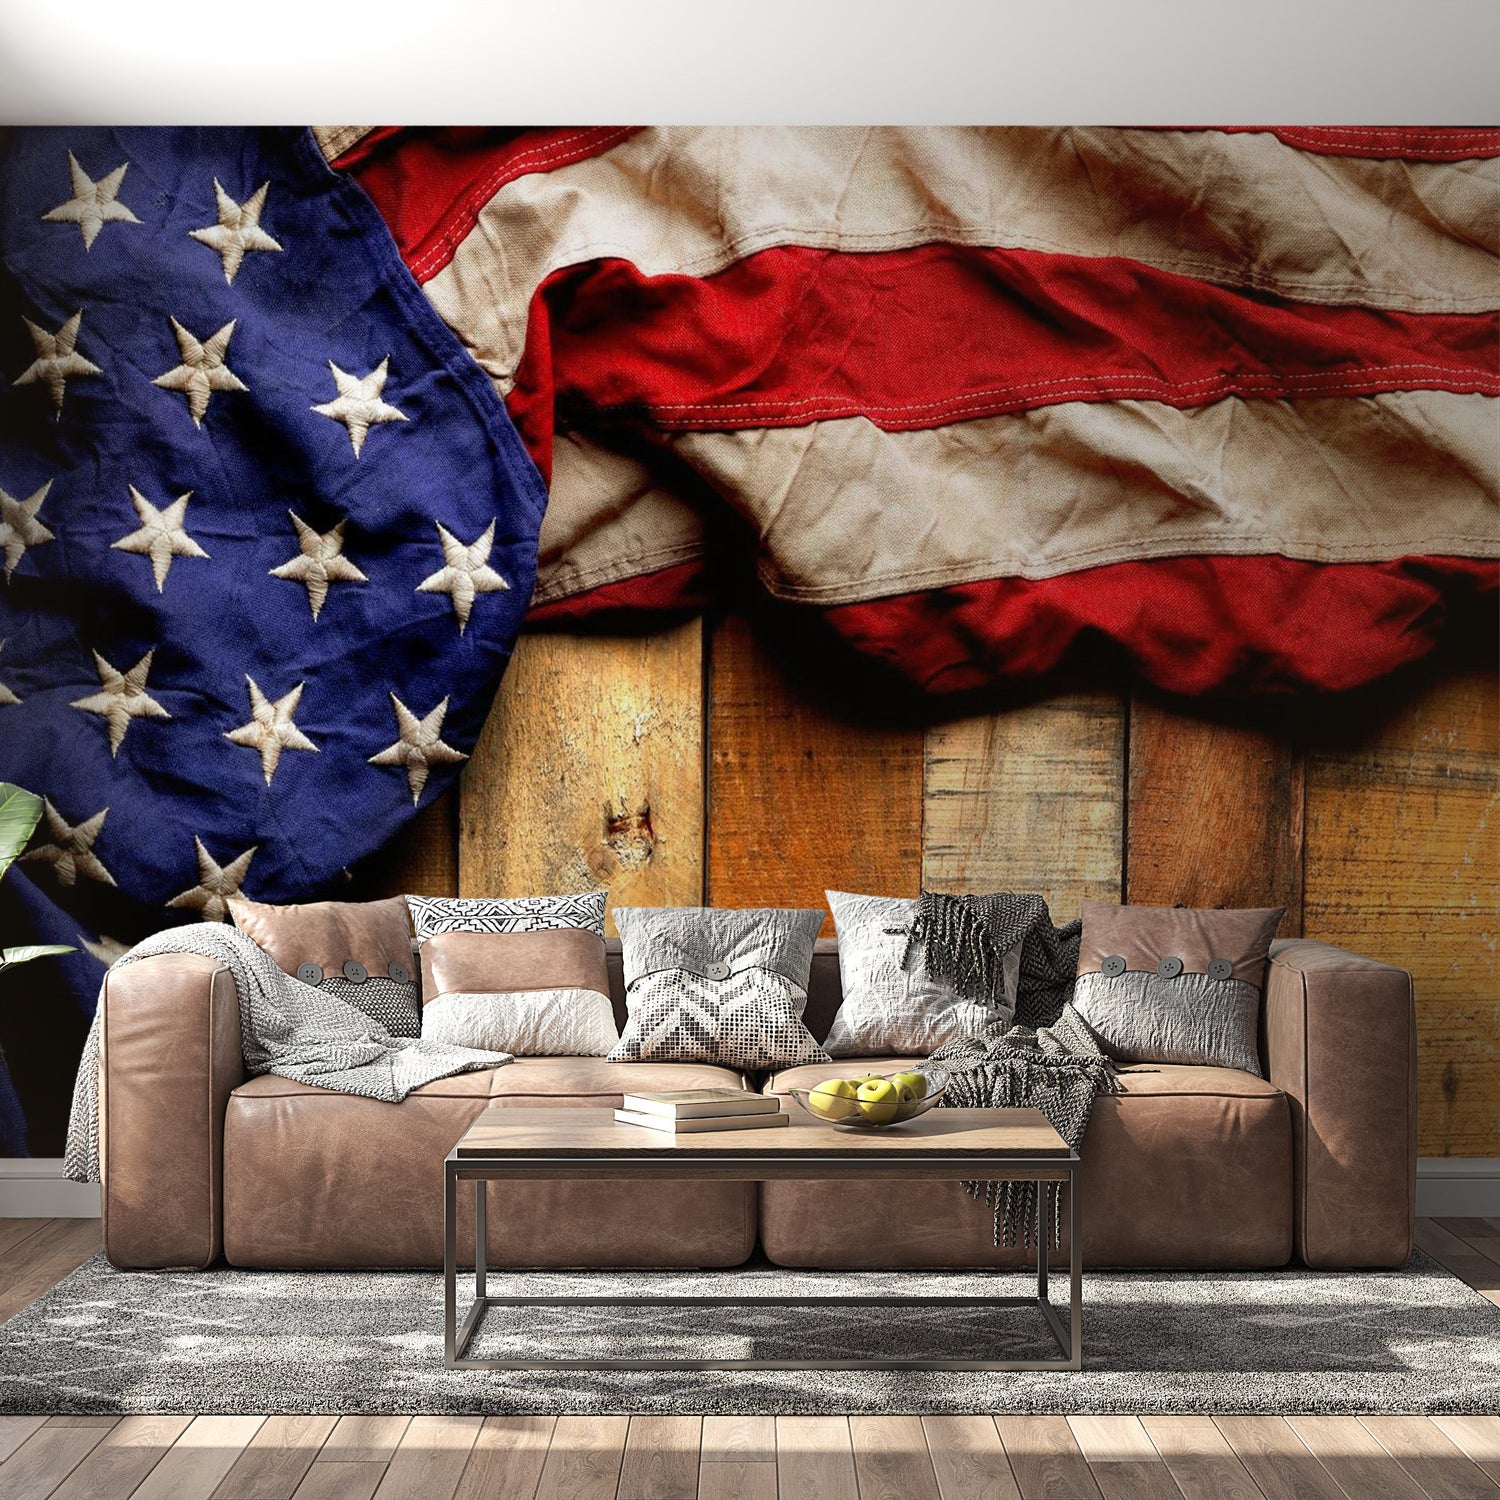 Peel & Stick Wall Mural - American Flag - Removable Wall Decals